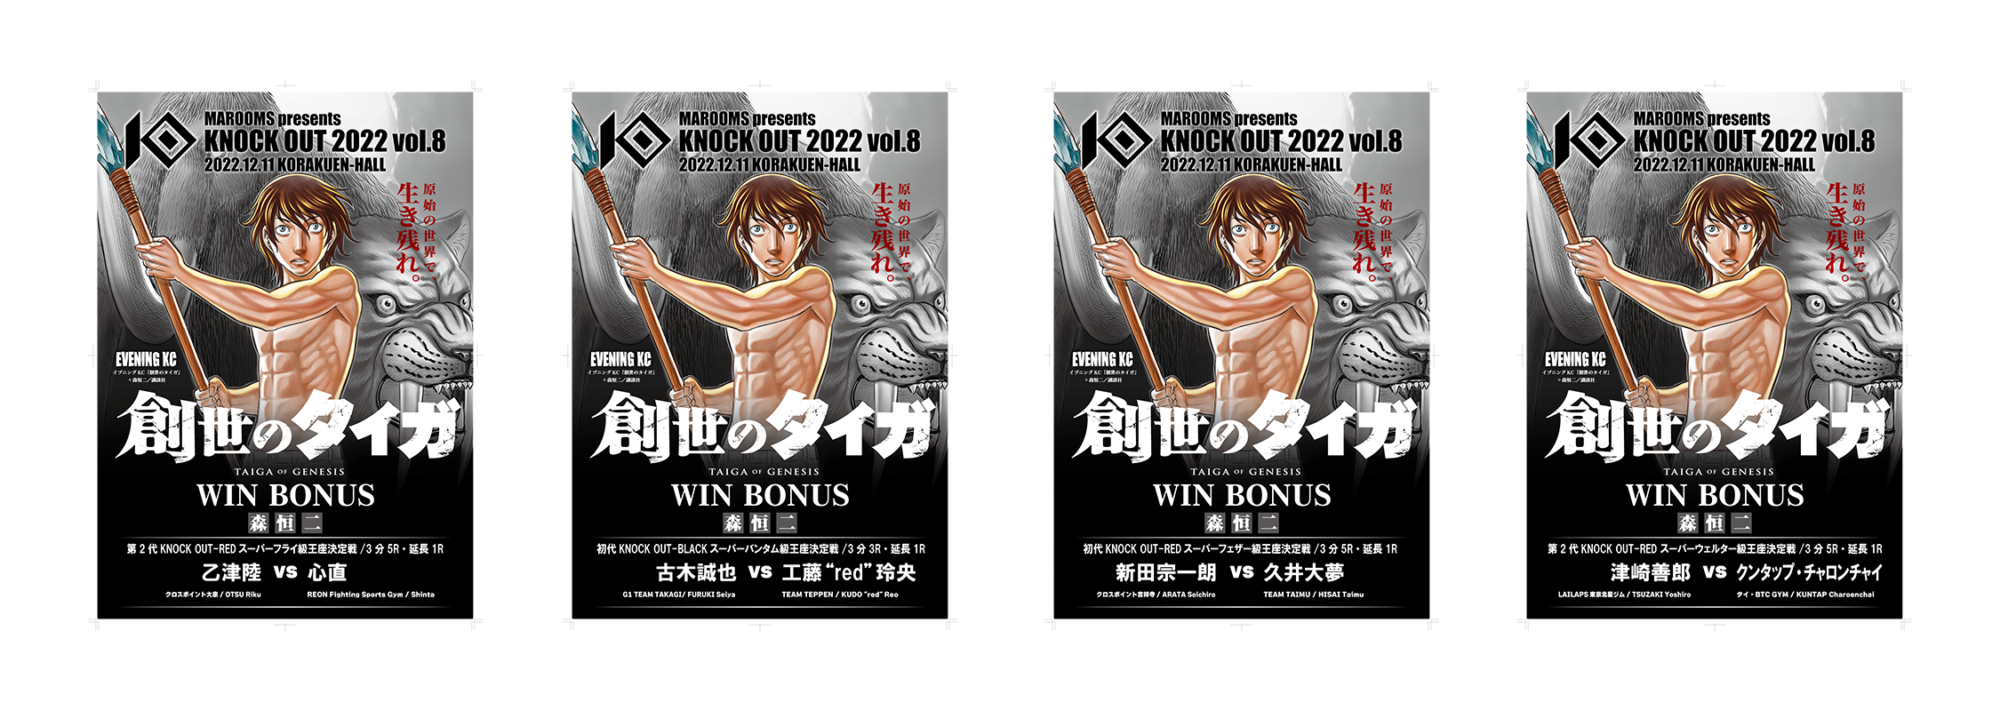 12.11 KNOCK OUT 2022 vol.8｜創世のタイガ賞の贈呈が決定！